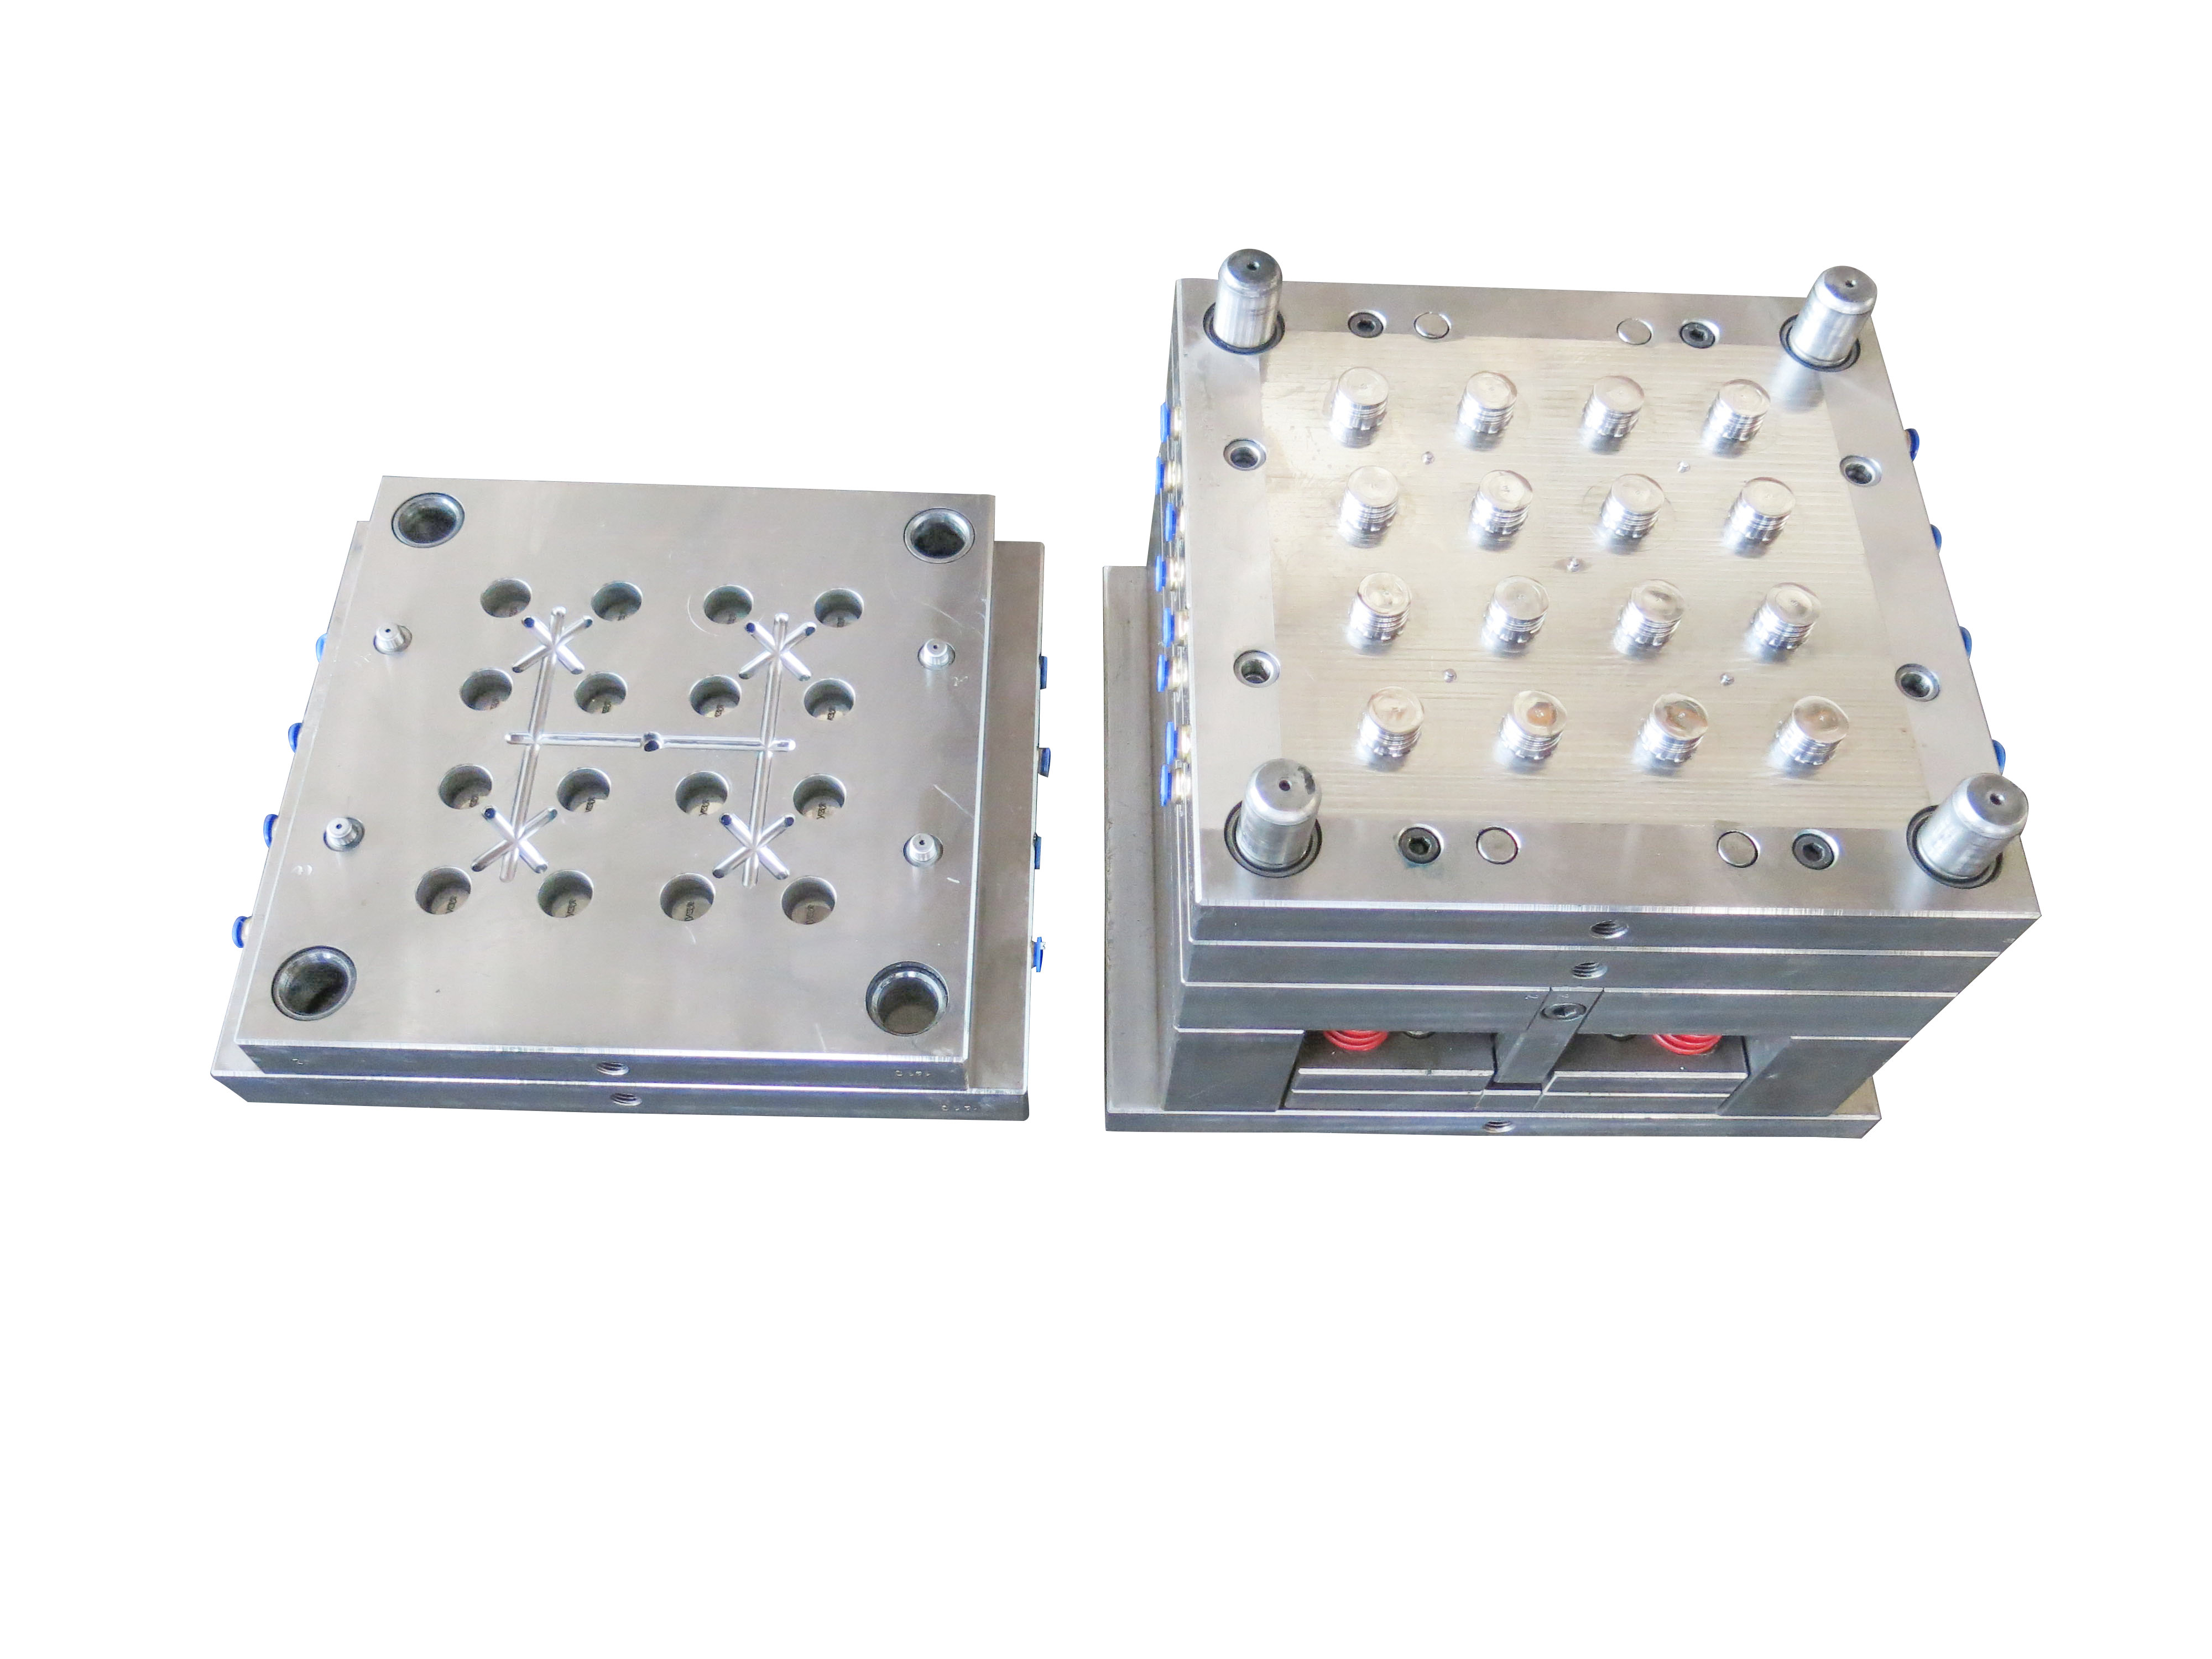 What problems are easily encountered in the processing of plastic molding molds？